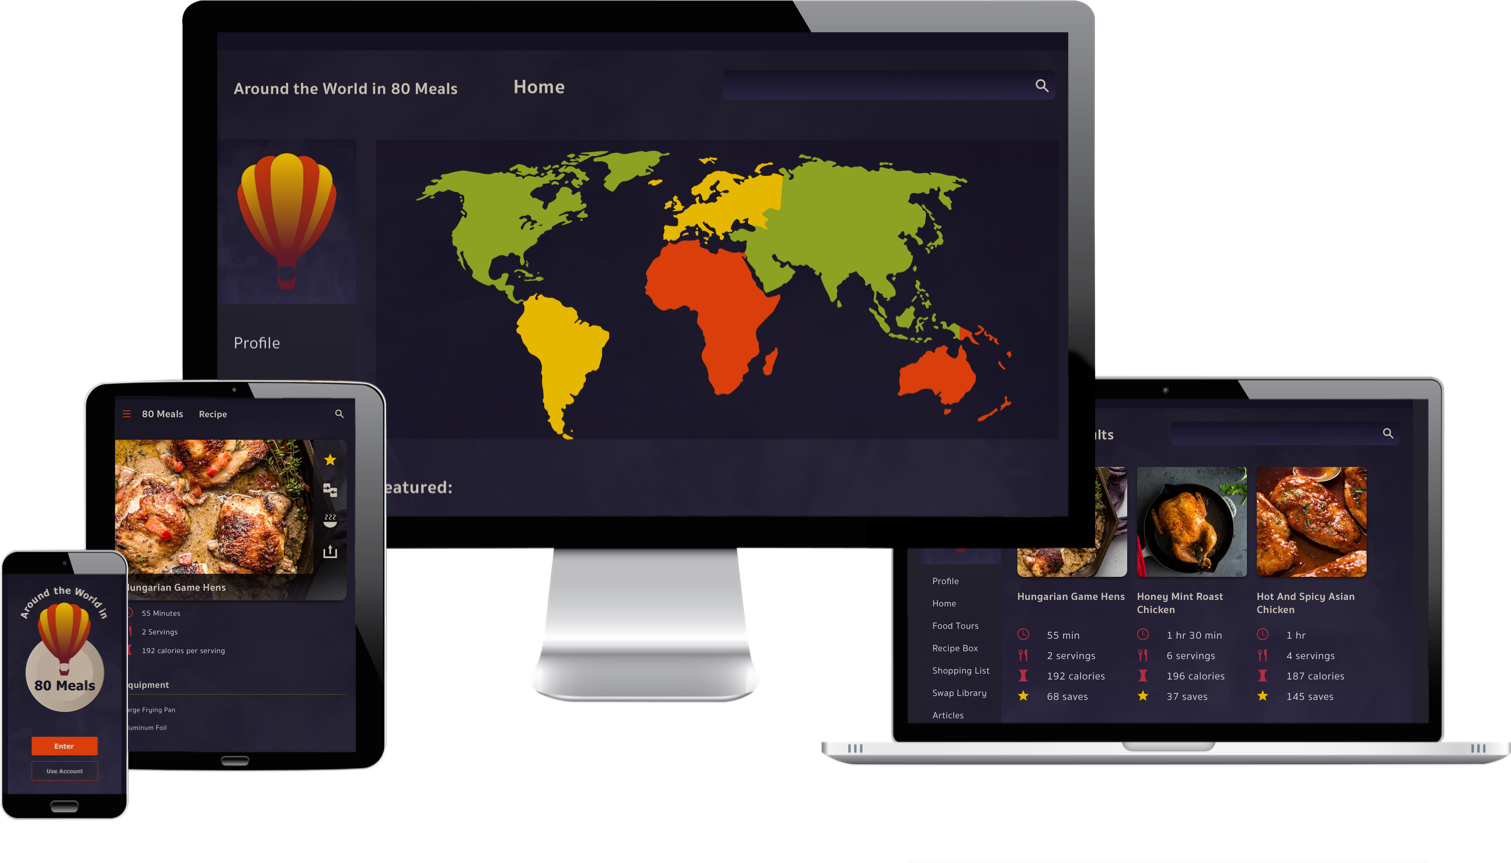 phone, tablet, desktop, and laptop displaying screens from the 80 Meals app